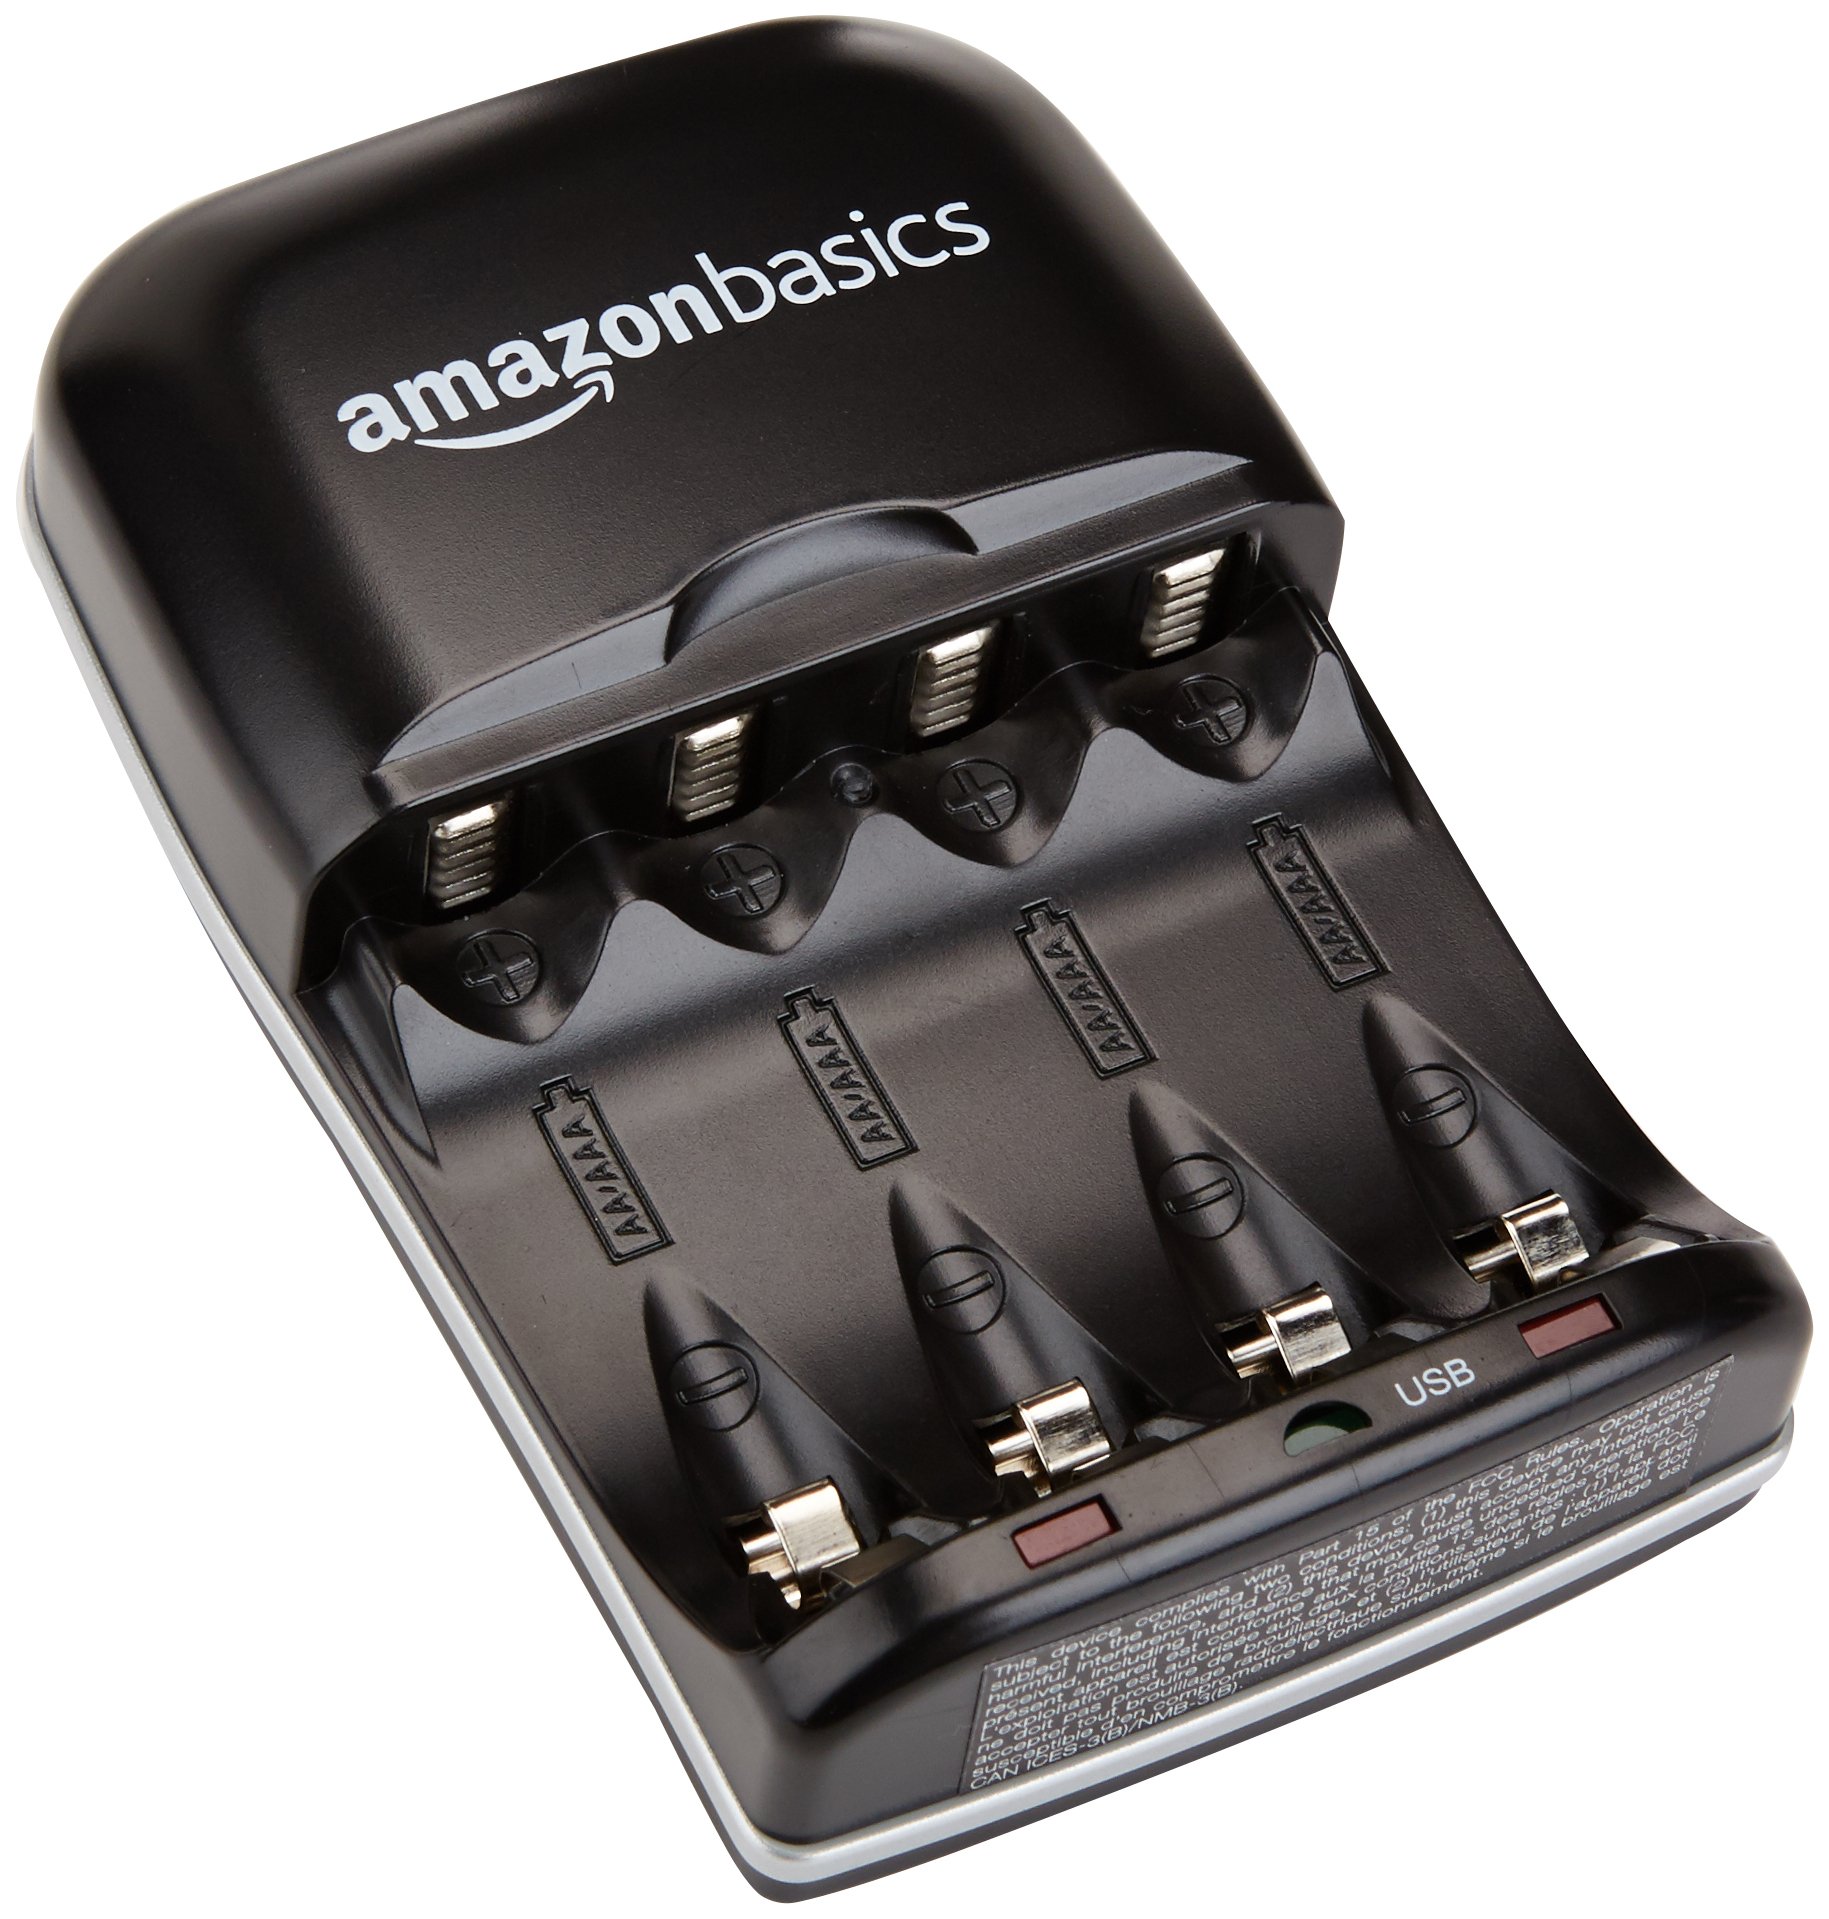 Amazon Basics Battery Charger for AA & AAA Nickel-Metal Hydride batteries (Ni-MH) With USB Port